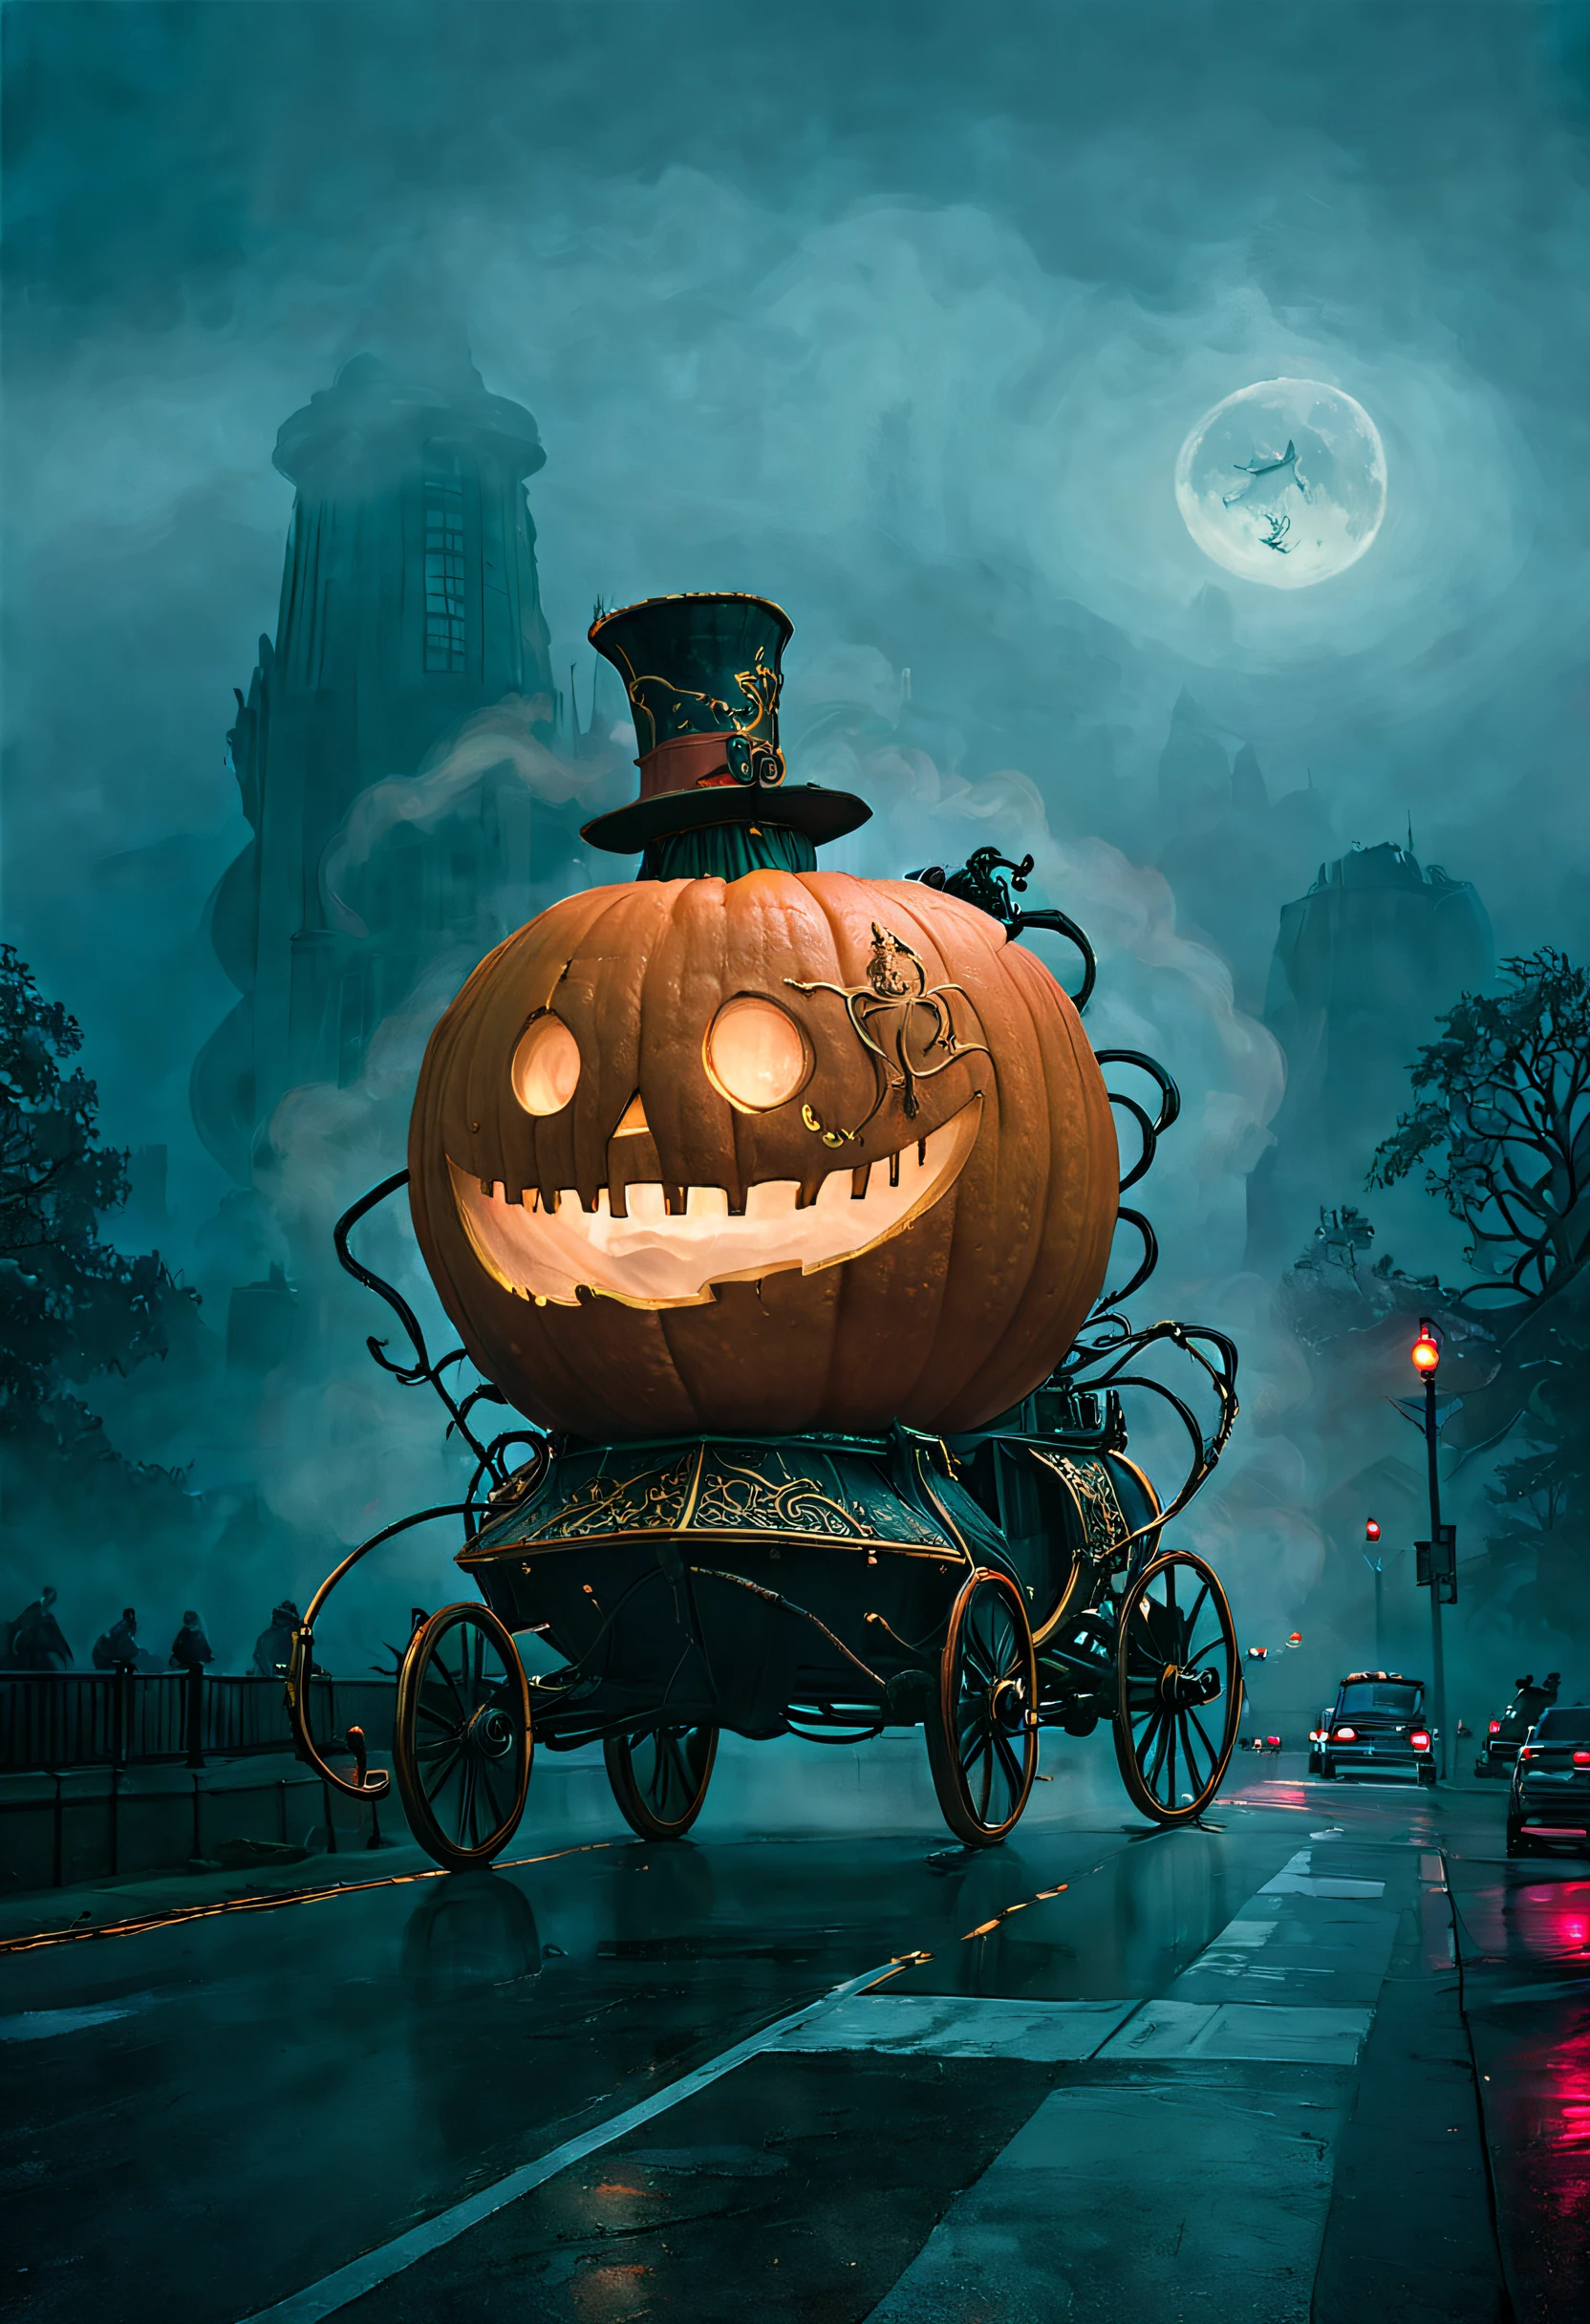 ssta, concept - Enchanted Pumpkin Carriage driving down city roadway at Dusk: A magical scene featuring a breathtaking pumpkin carriage, beautifully adorned with intricate carvings and glowing from within, is captured at dusk, surrounded by soft, warm light and mysterious, swirling mist, reflecting the fairytale charm and wonder of the enchanted vehicle, and contrasting with typical mundane reality.